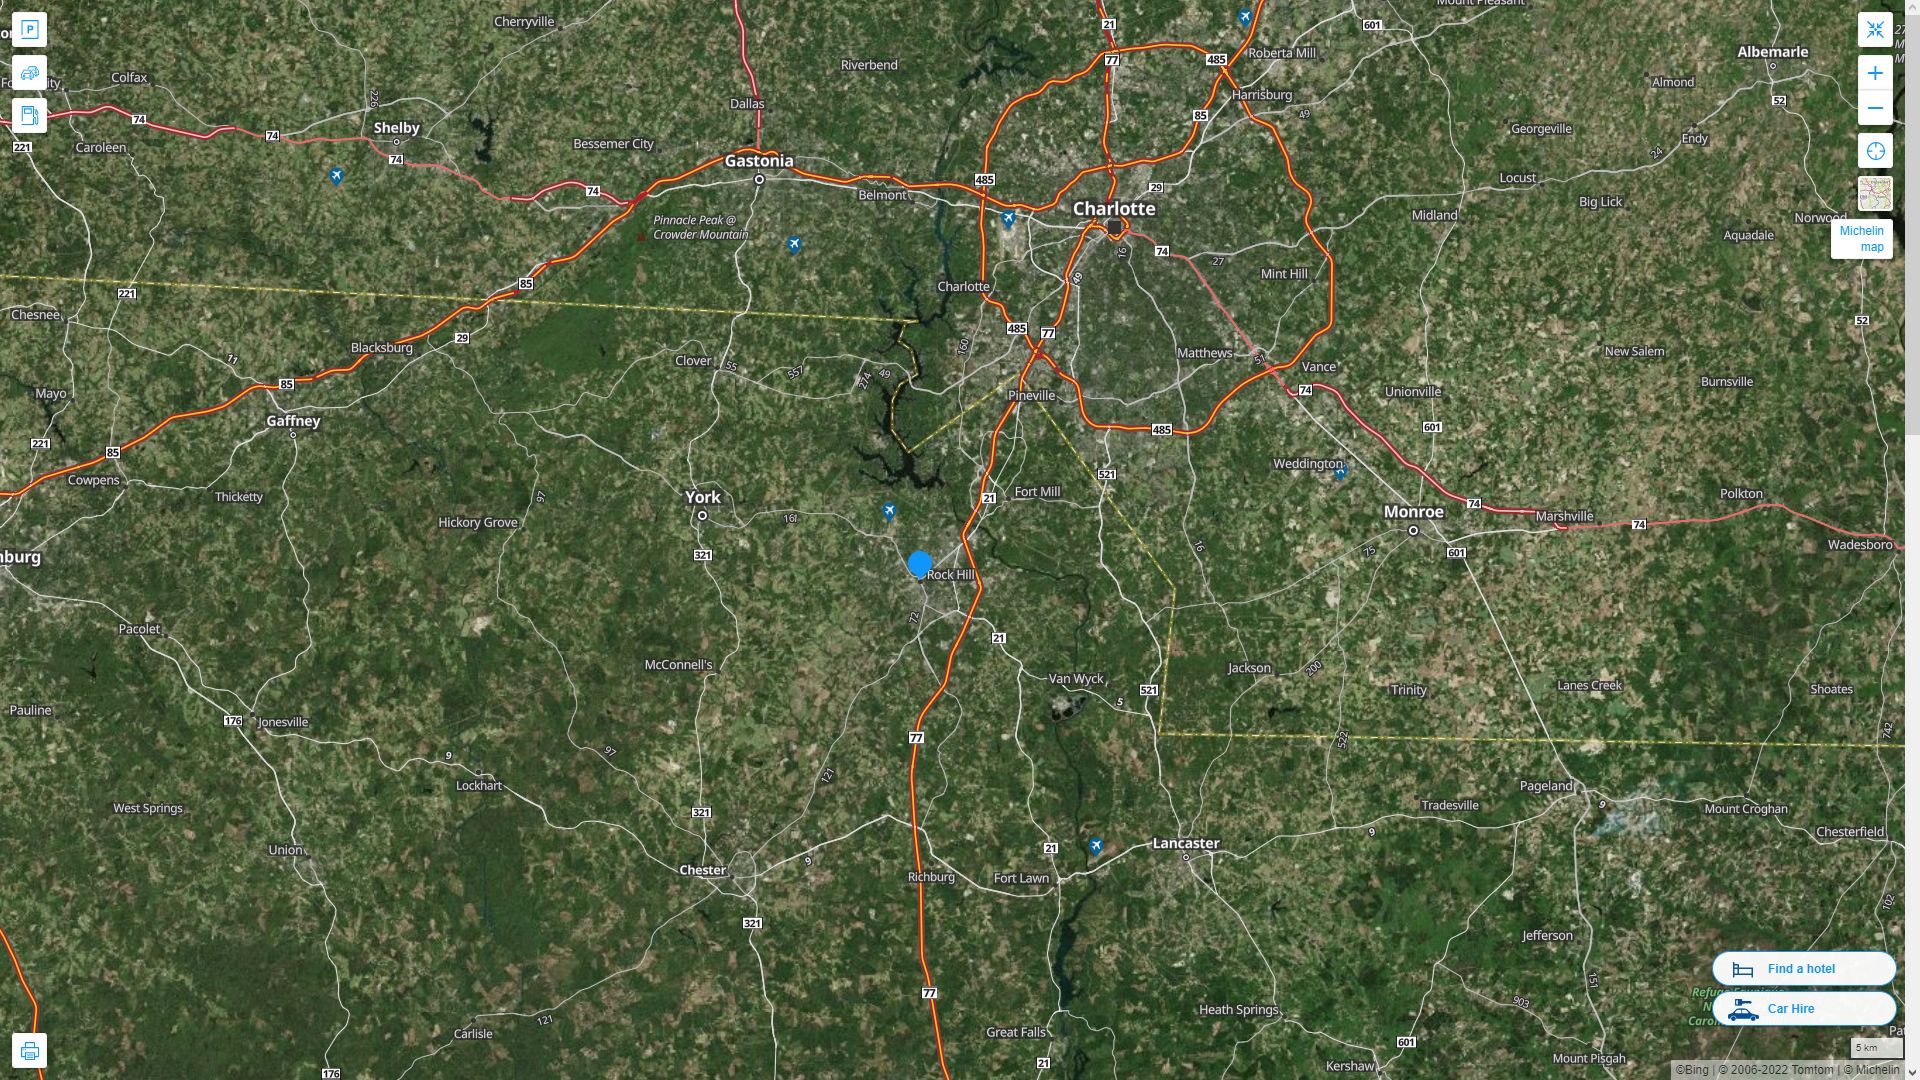 Rock Hill South Carolina Highway and Road Map with Satellite View